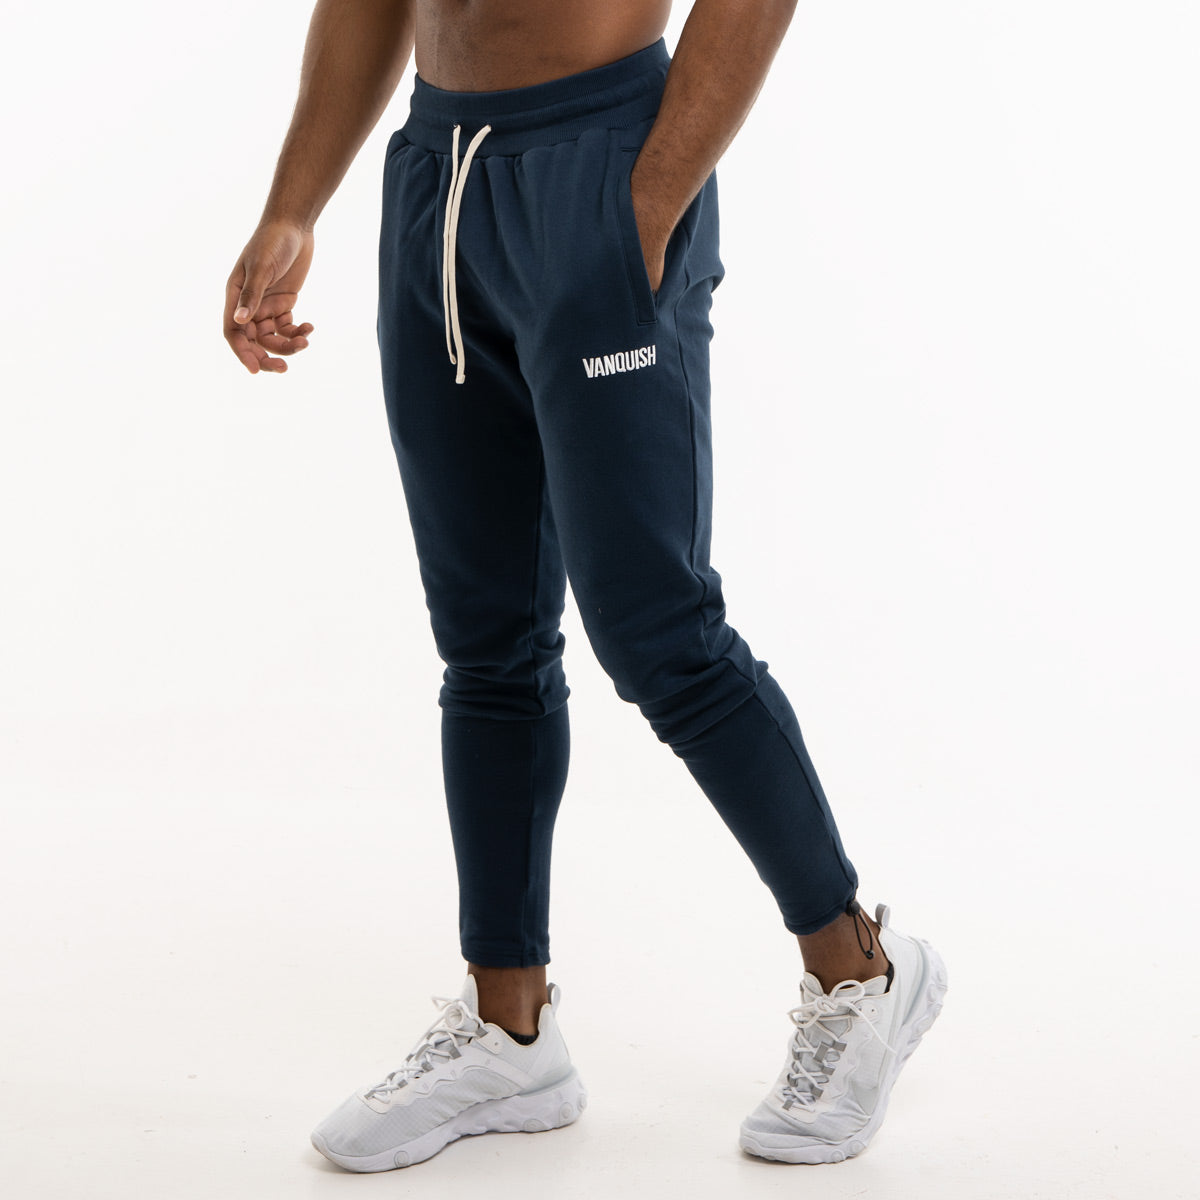 Vanquish Warm Up Project Navy Tapered Sweatpants